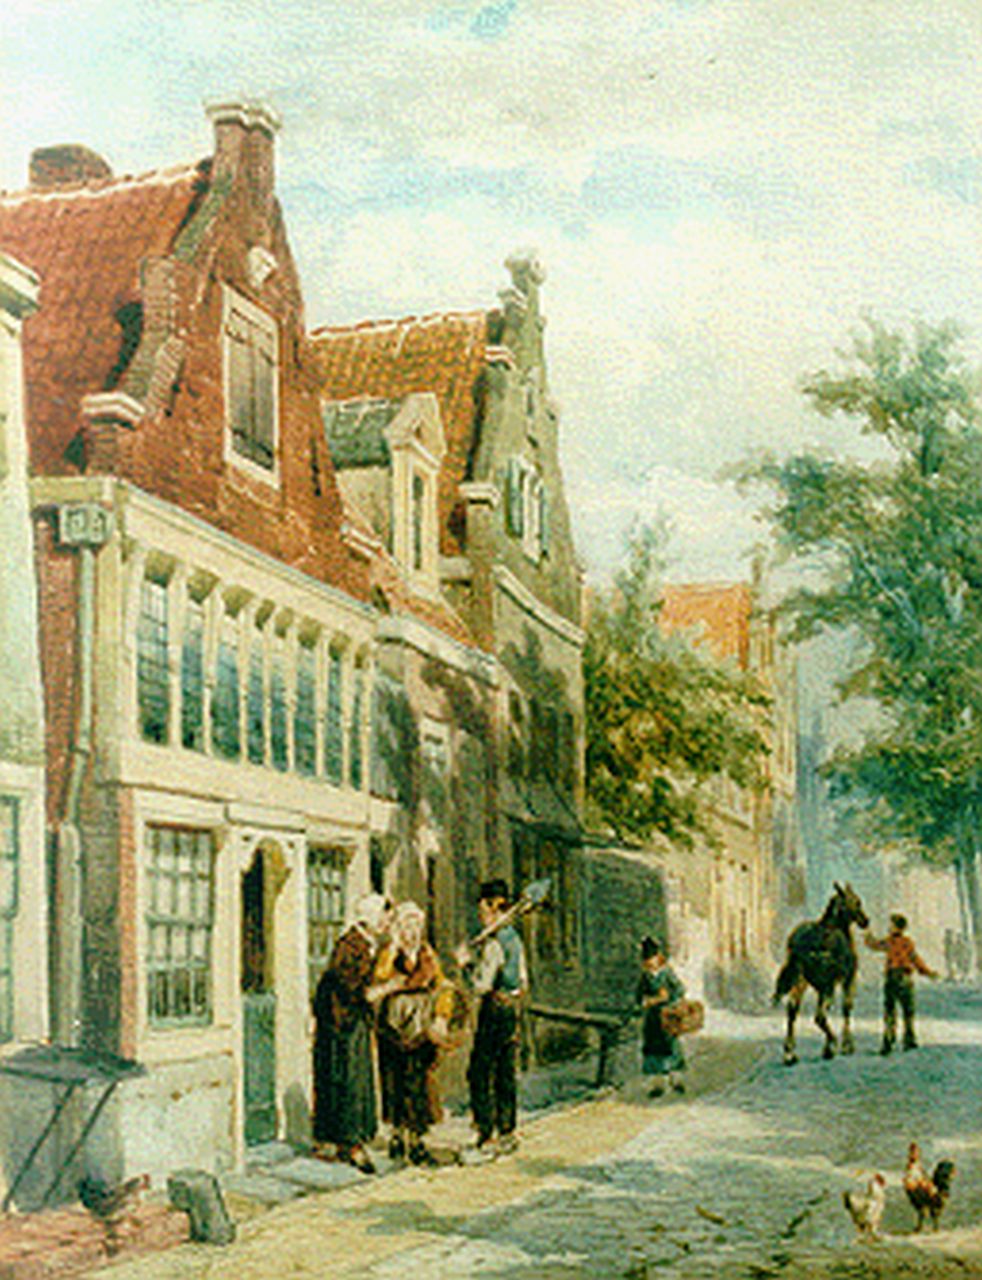 Springer C.  | Cornelis Springer, A view of the Zuiderhavendijk in Enkhuizen, watercolour on paper 27.4 x 21.3 cm, signed l.r. and dated '86